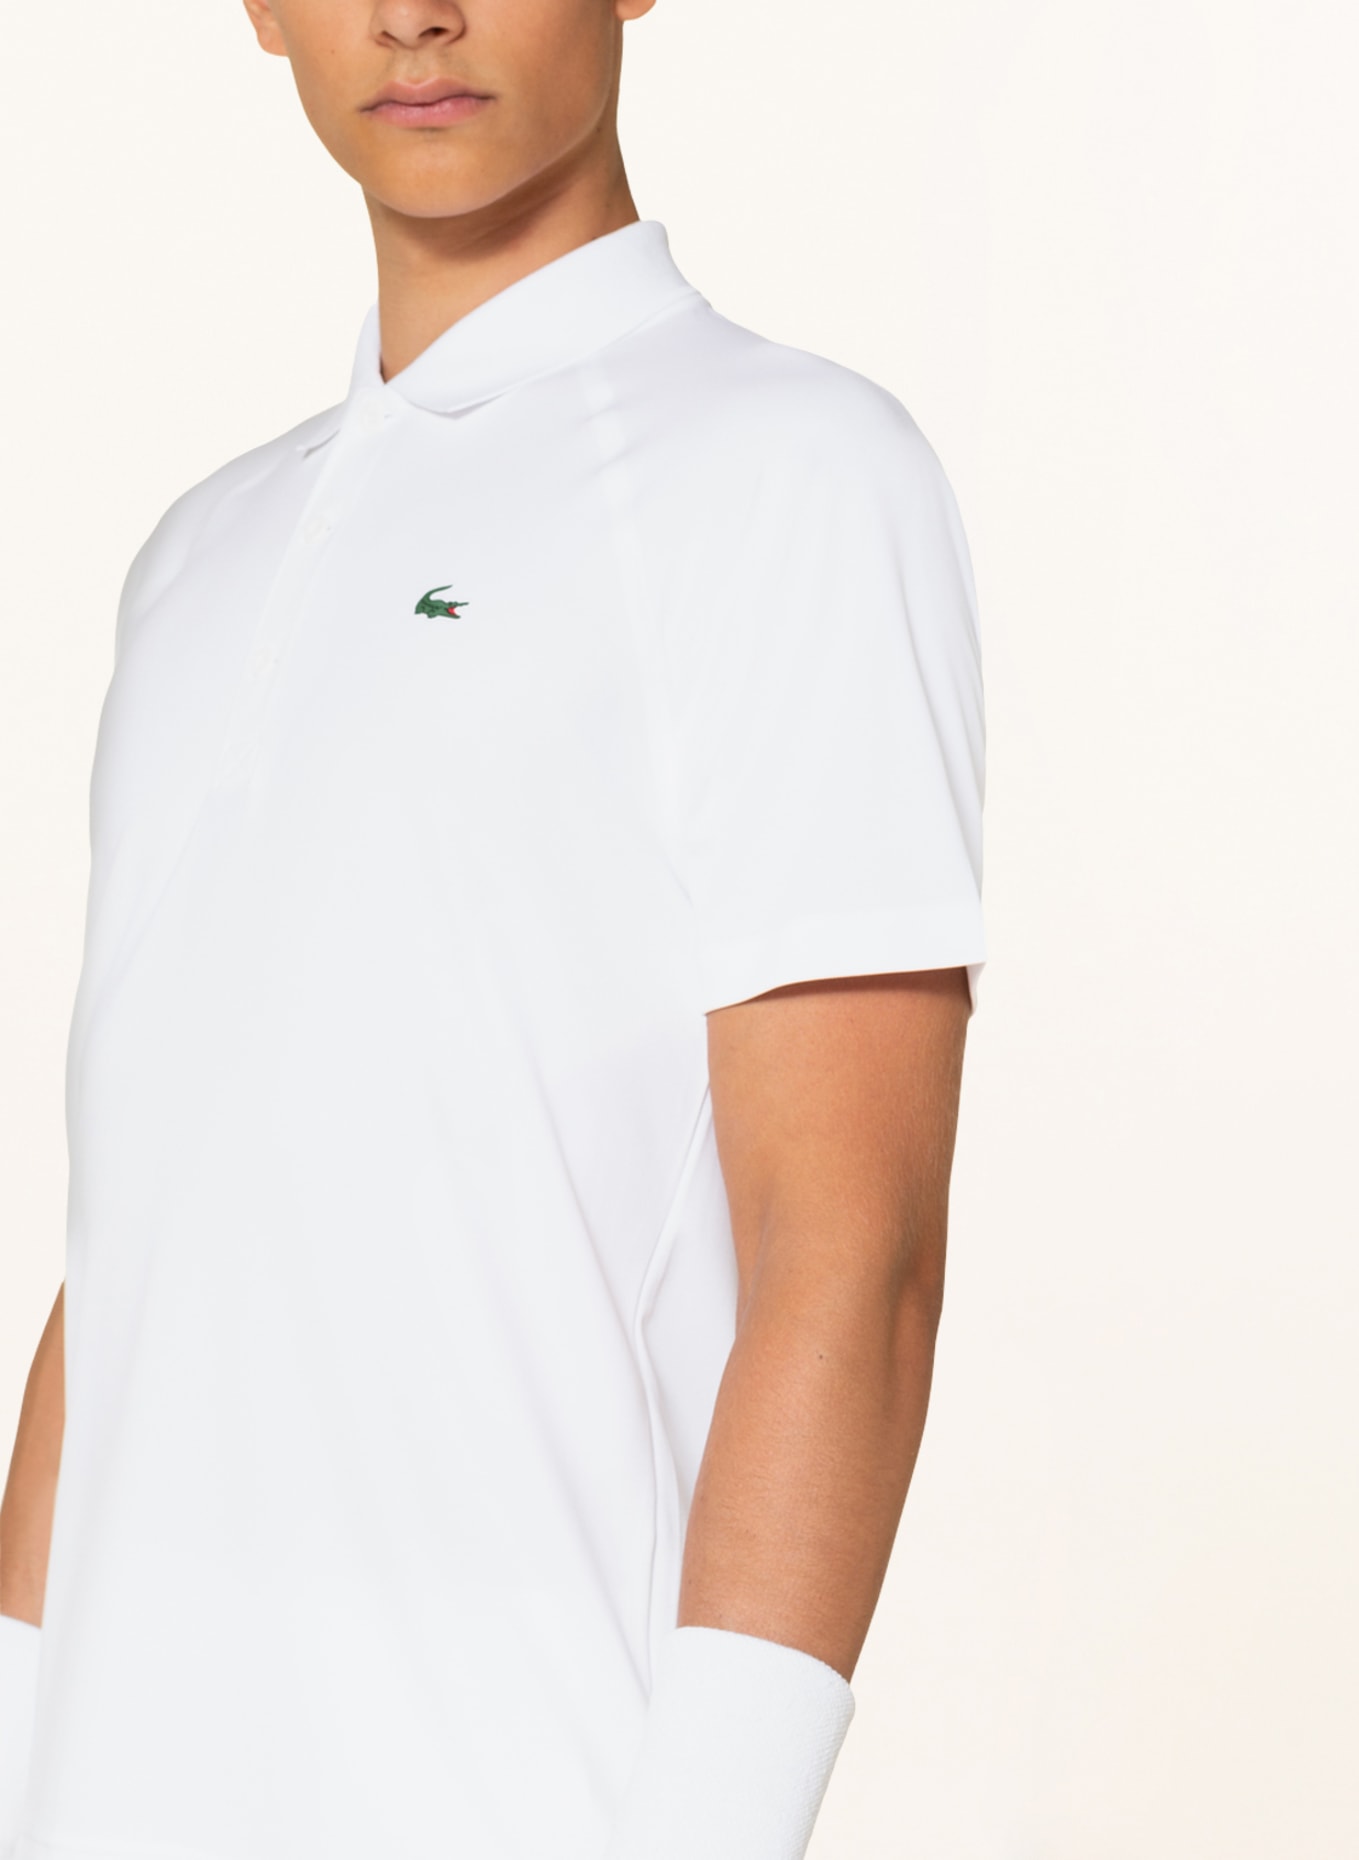 LACOSTE Funktions-Poloshirt, Farbe: WEISS (Bild 4)